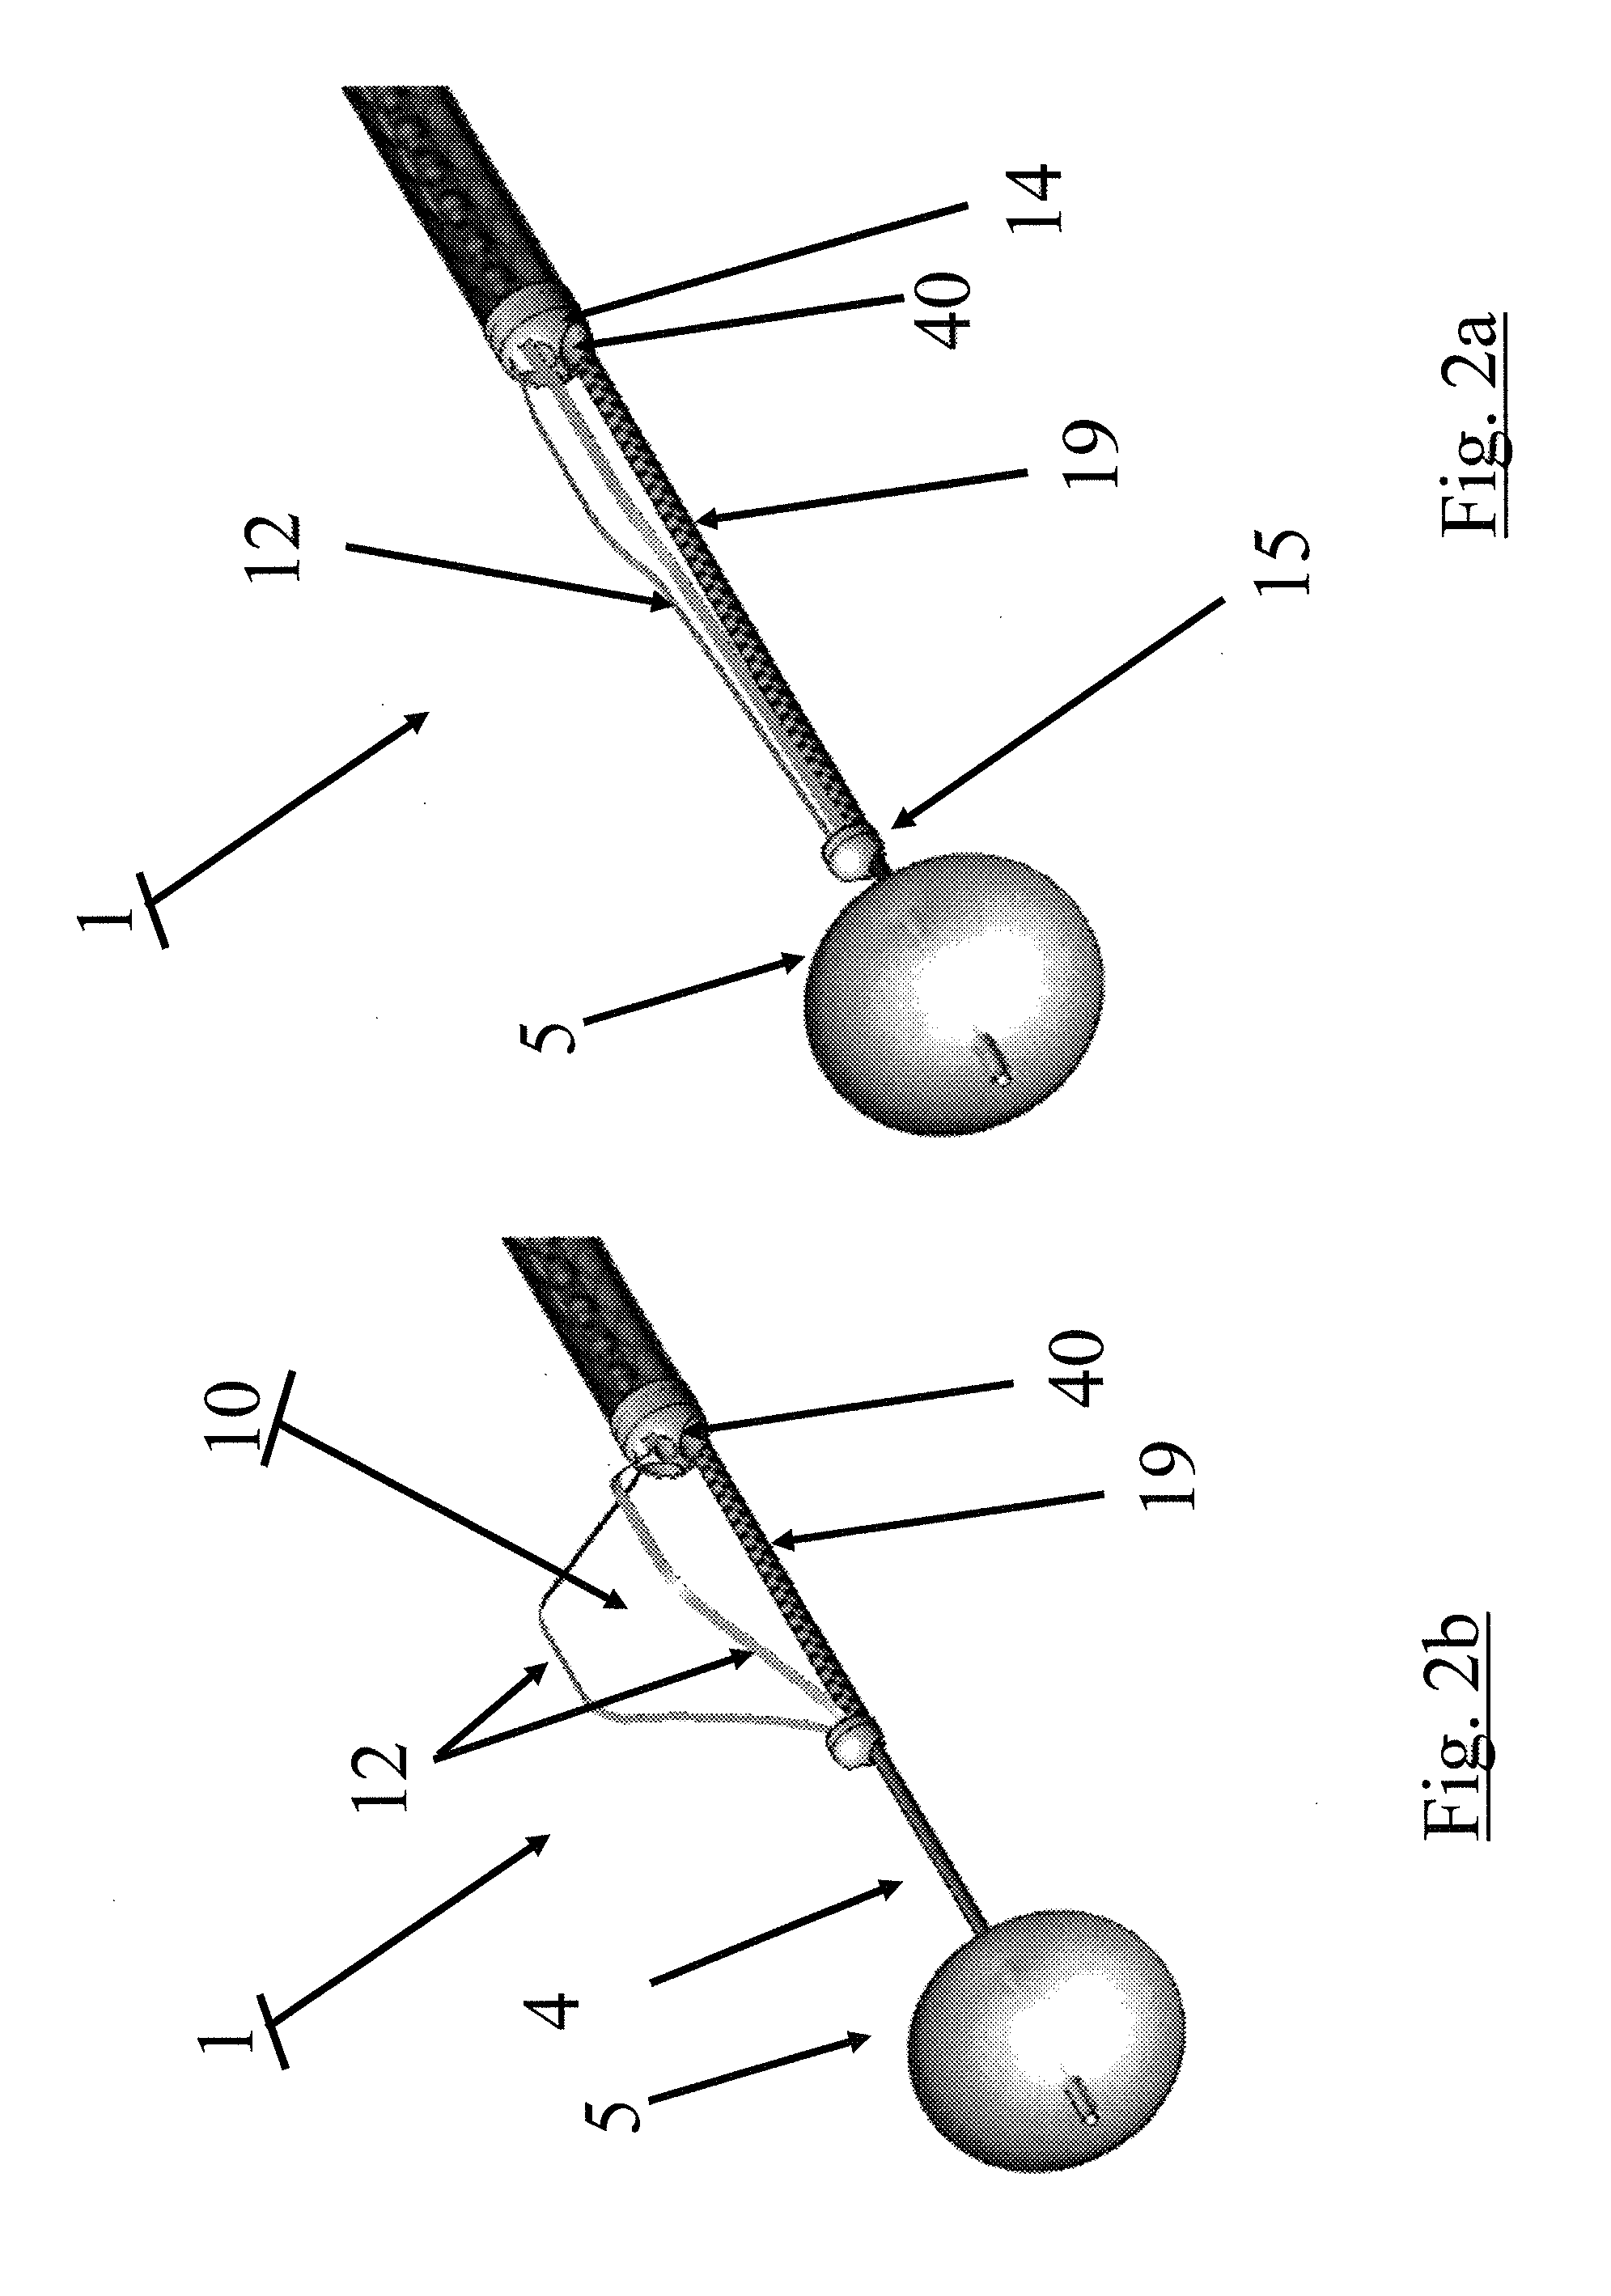 Arrangements and methods for effecting an endoluminal anatomical structure